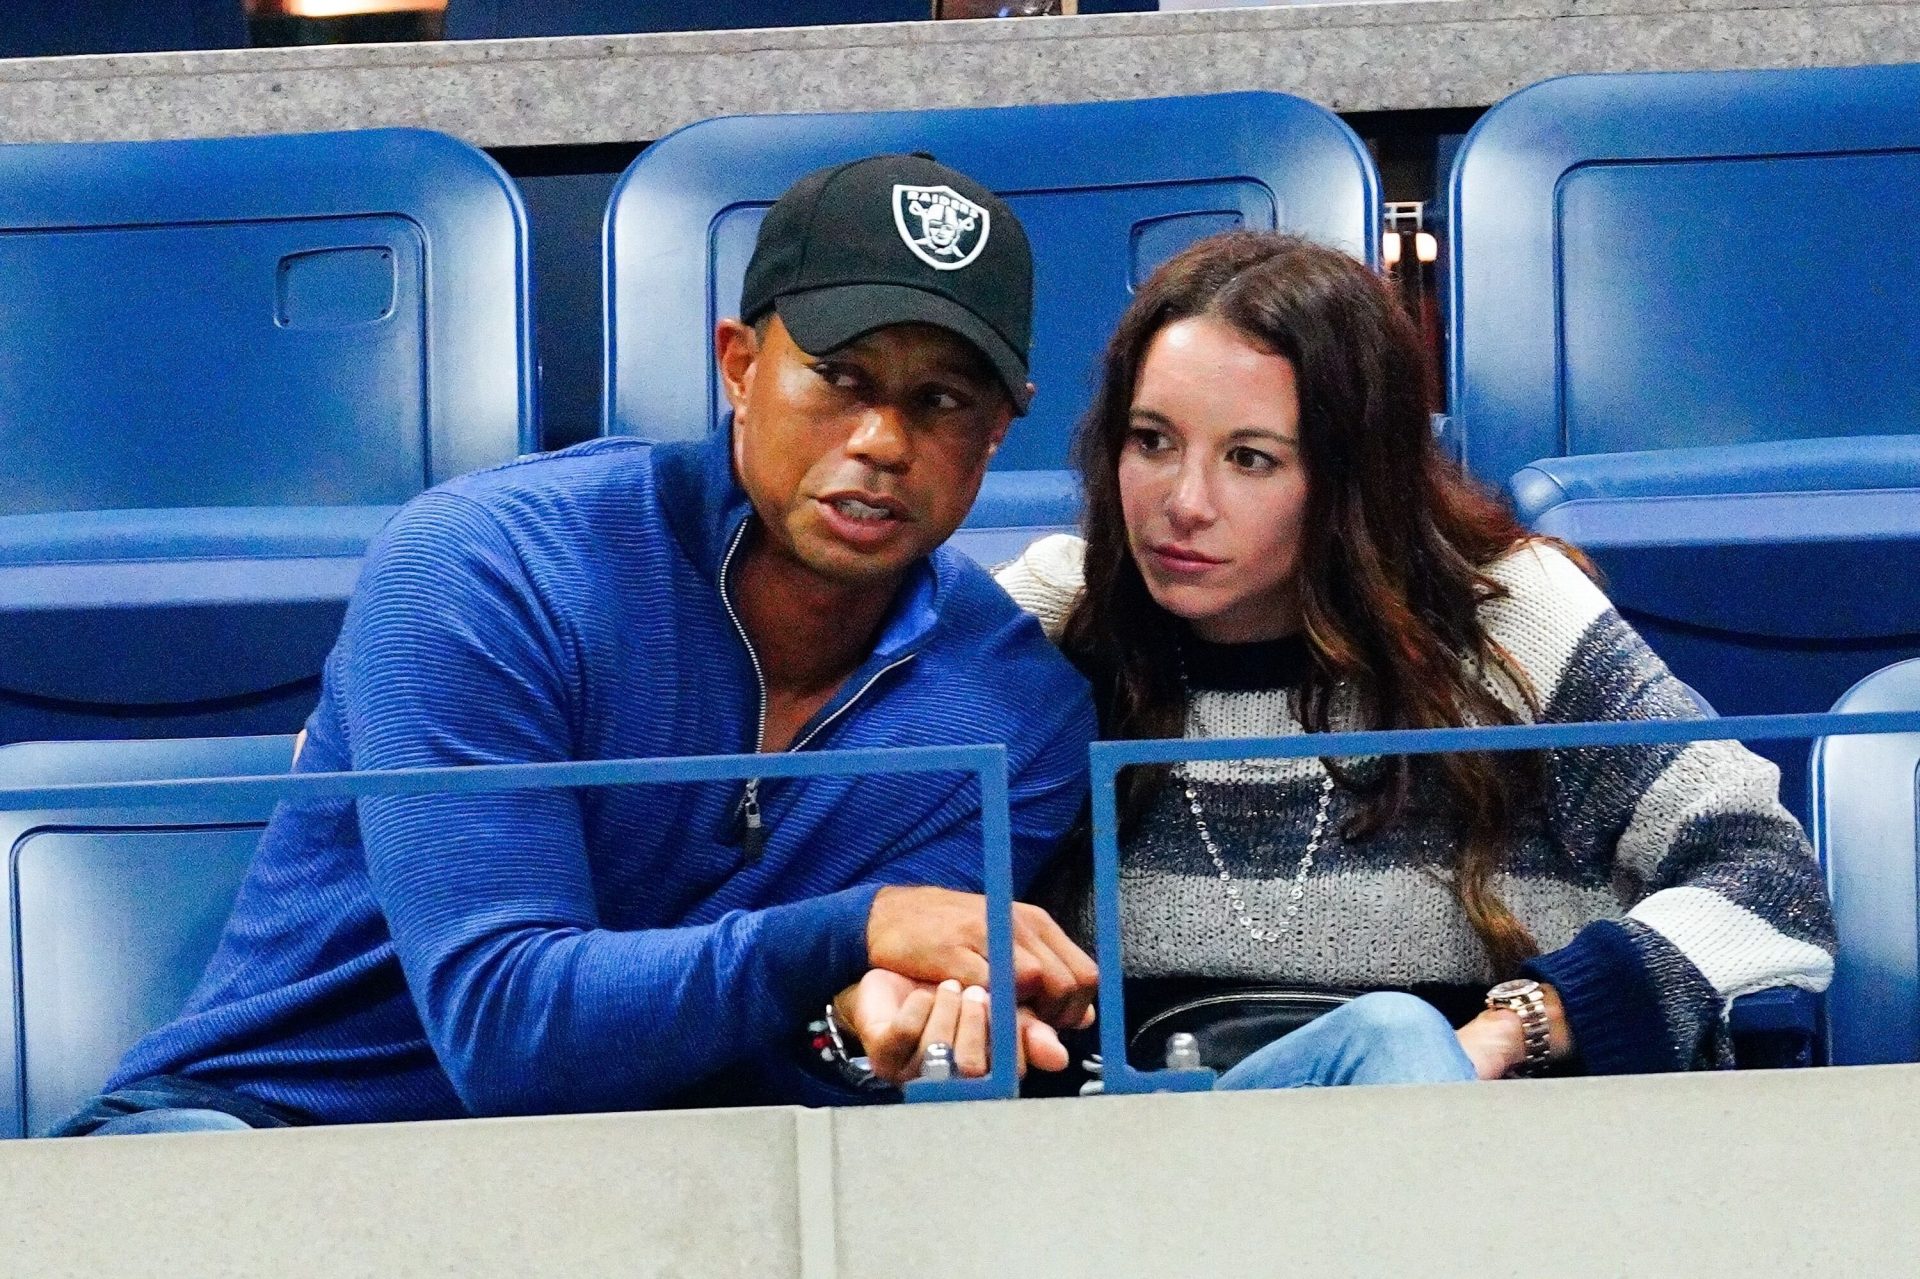 Tiger Woods’ Ex-Girlfriend Seeks $30 Million After Being Booted From His Home Following Their Split